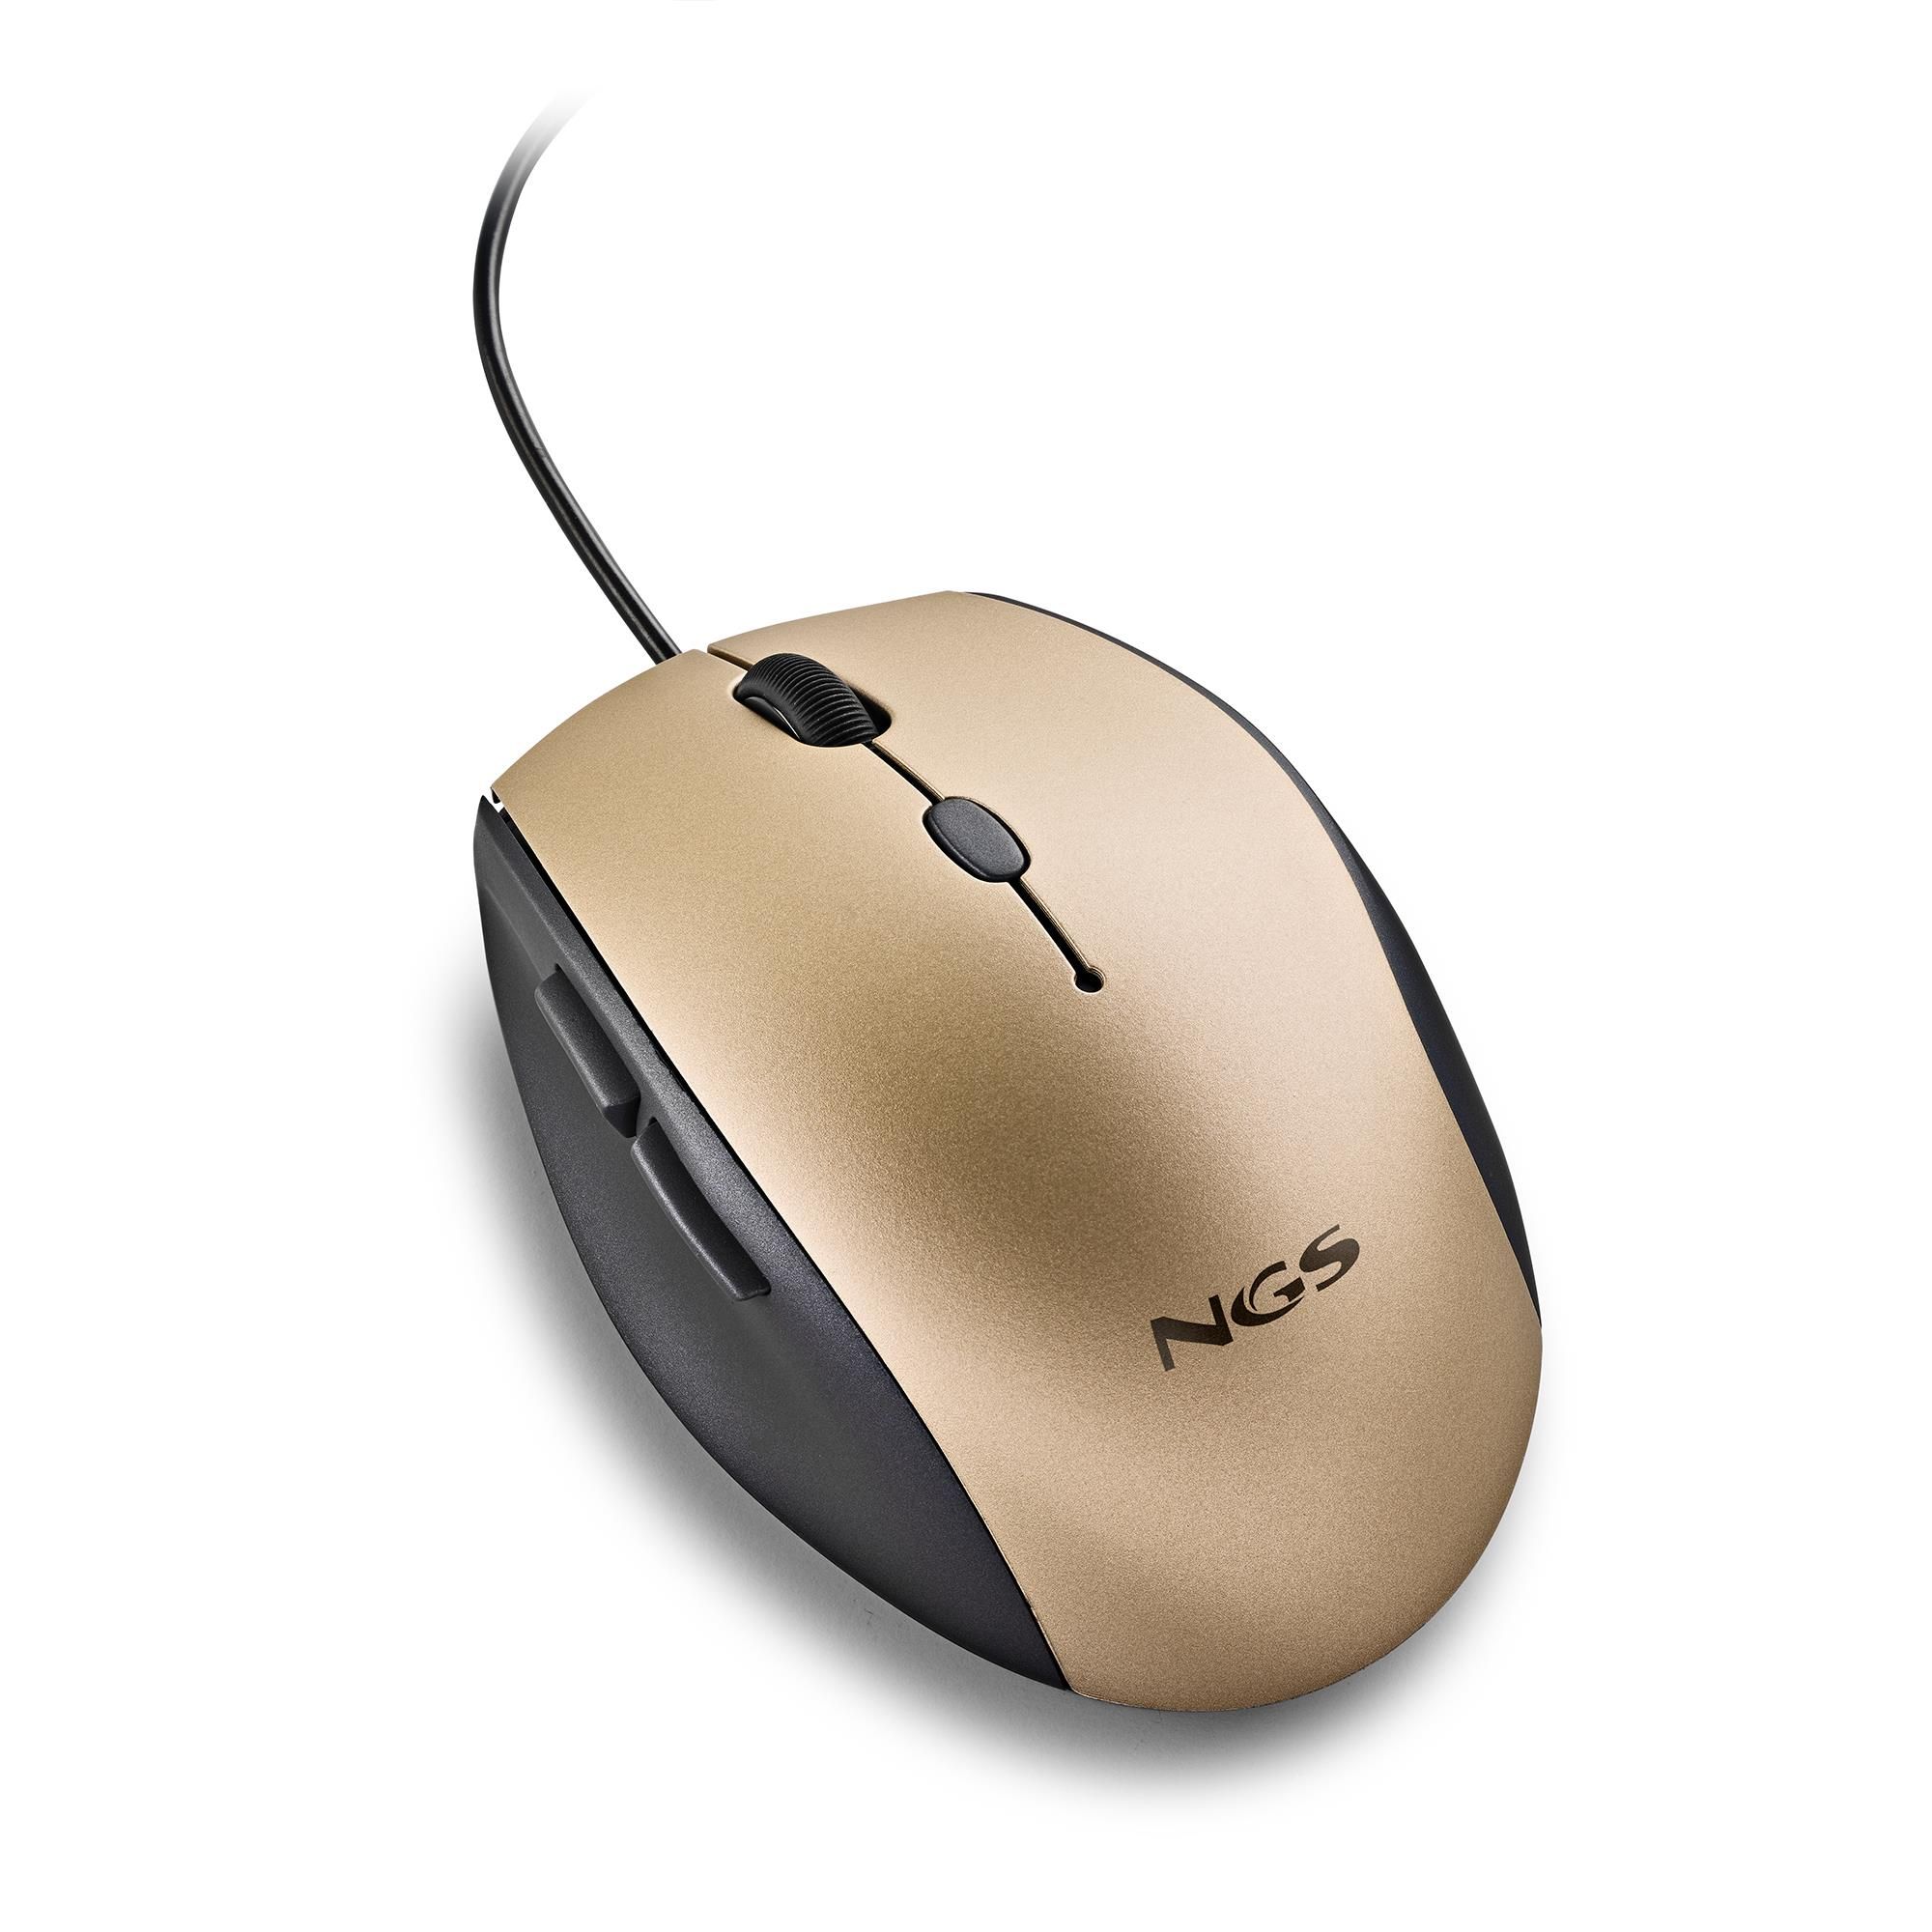 NGS-MOUSE-1237 Foto: 3